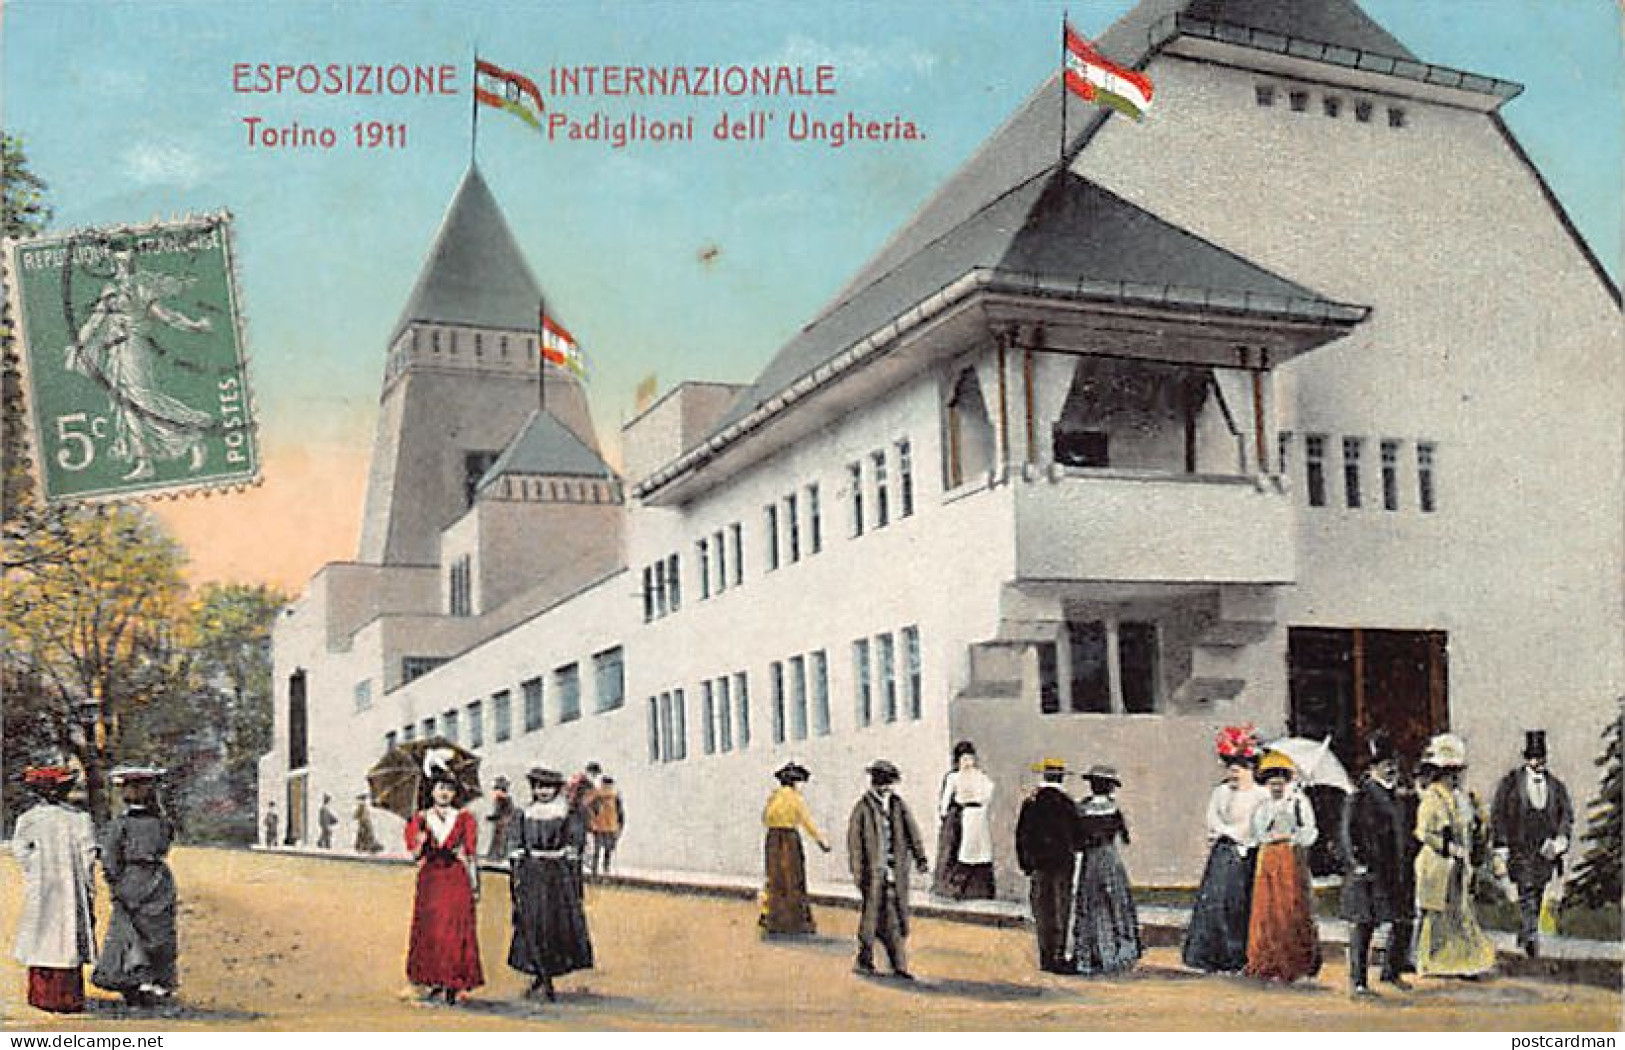 Hungary - The Hungaria Pavilion At The 1911 International Exhibition In Torino, Italy - Hungary